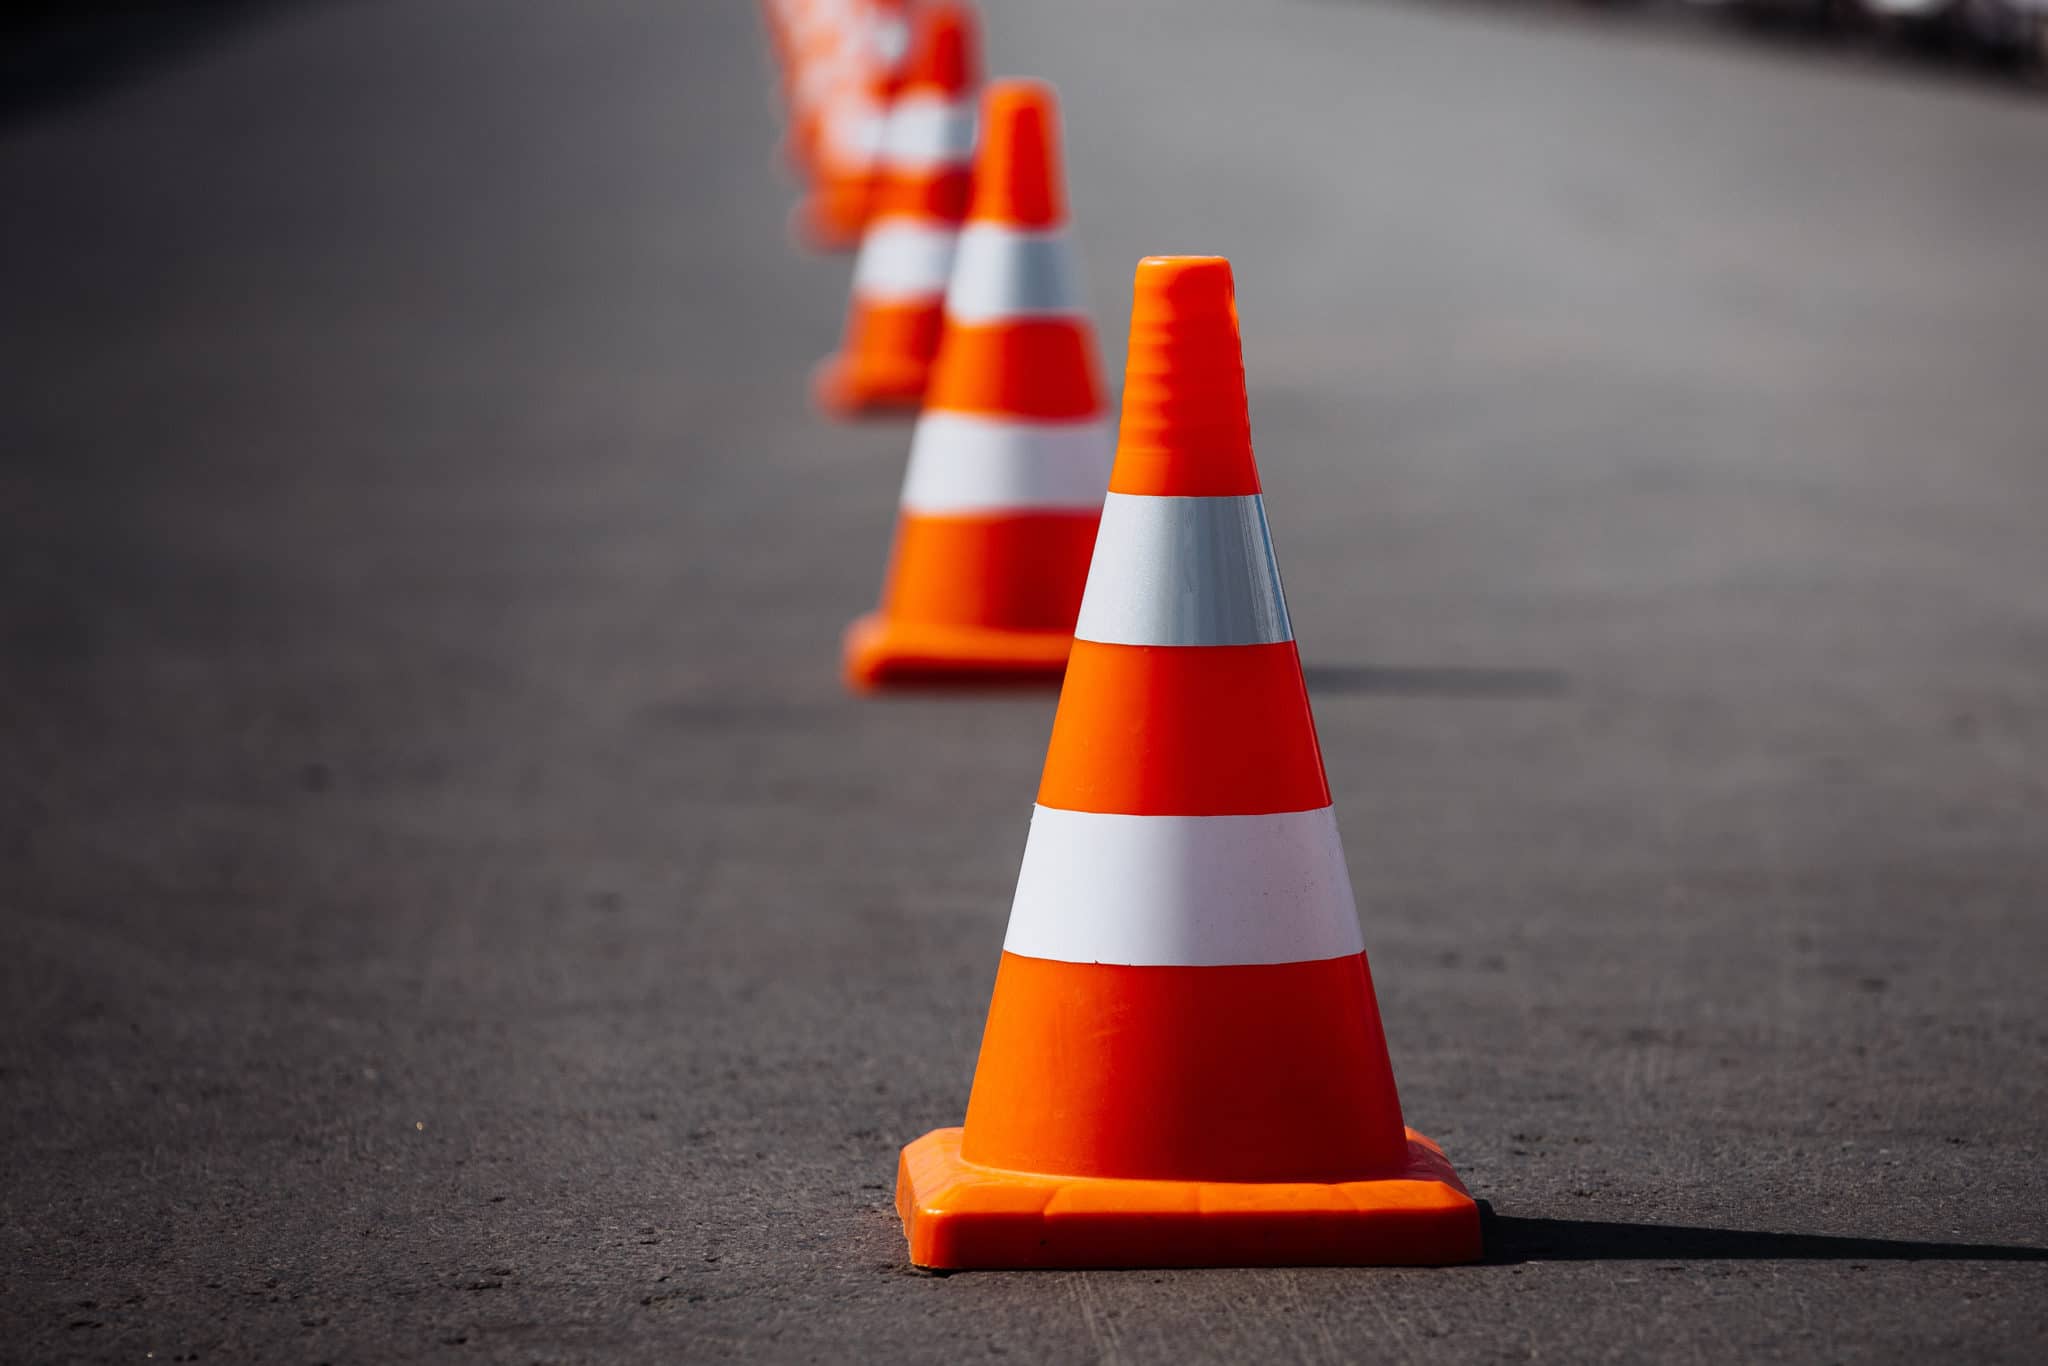 Four State Farm Show Road Closures – Section of South Homer Street, Research Road